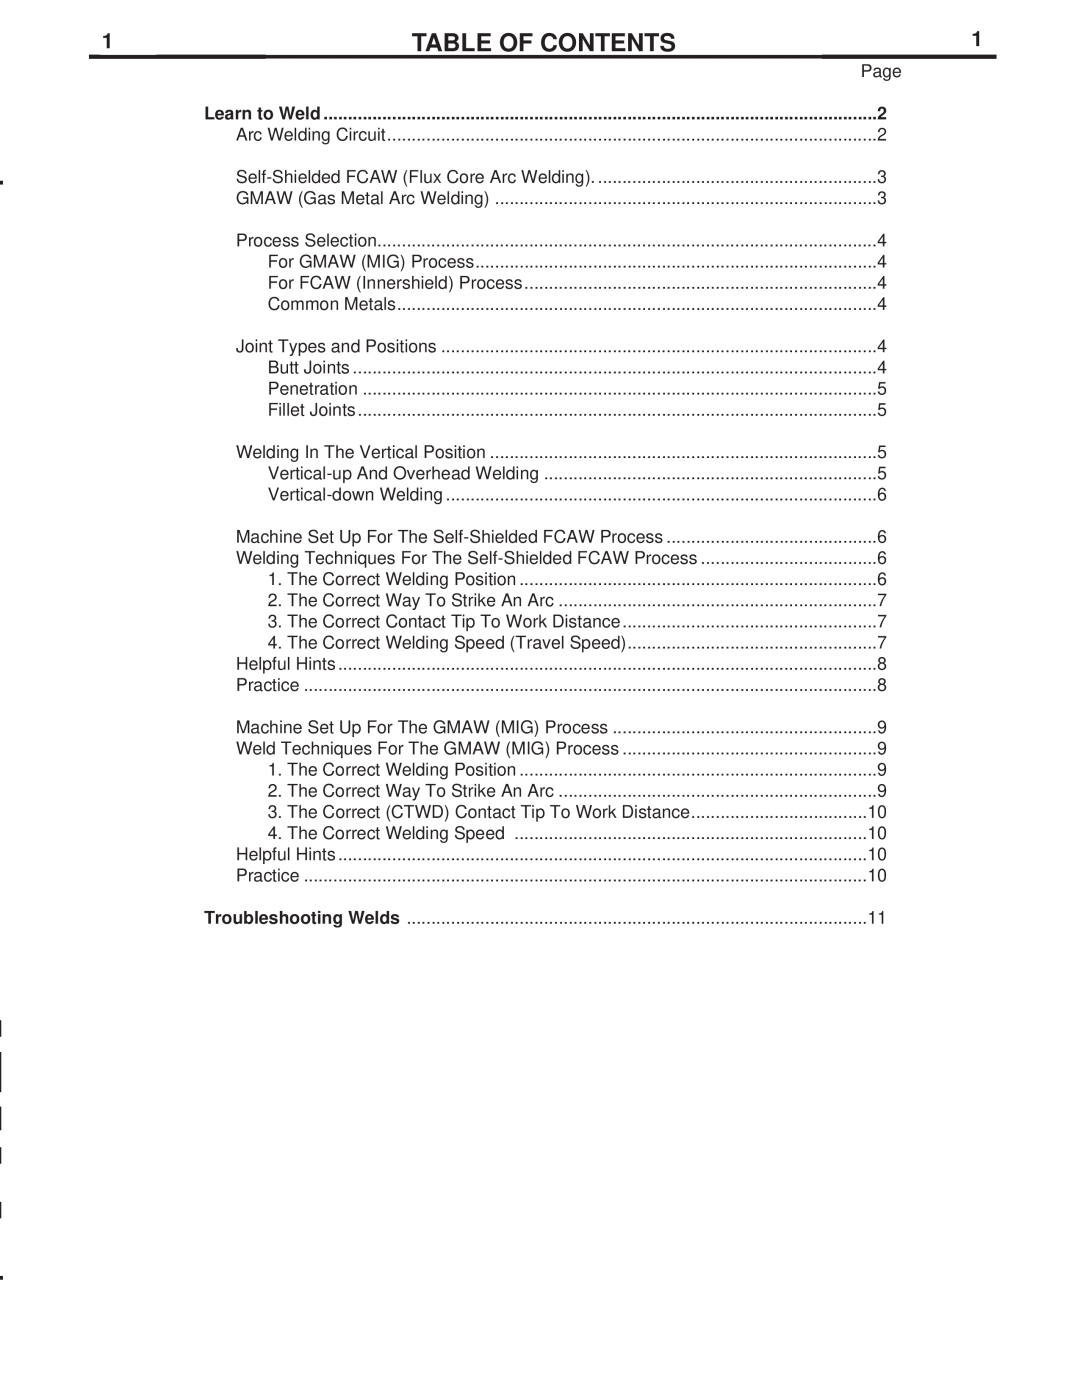 Lincoln Electric LTW1 manual Table Of Contents, Learn to Weld 